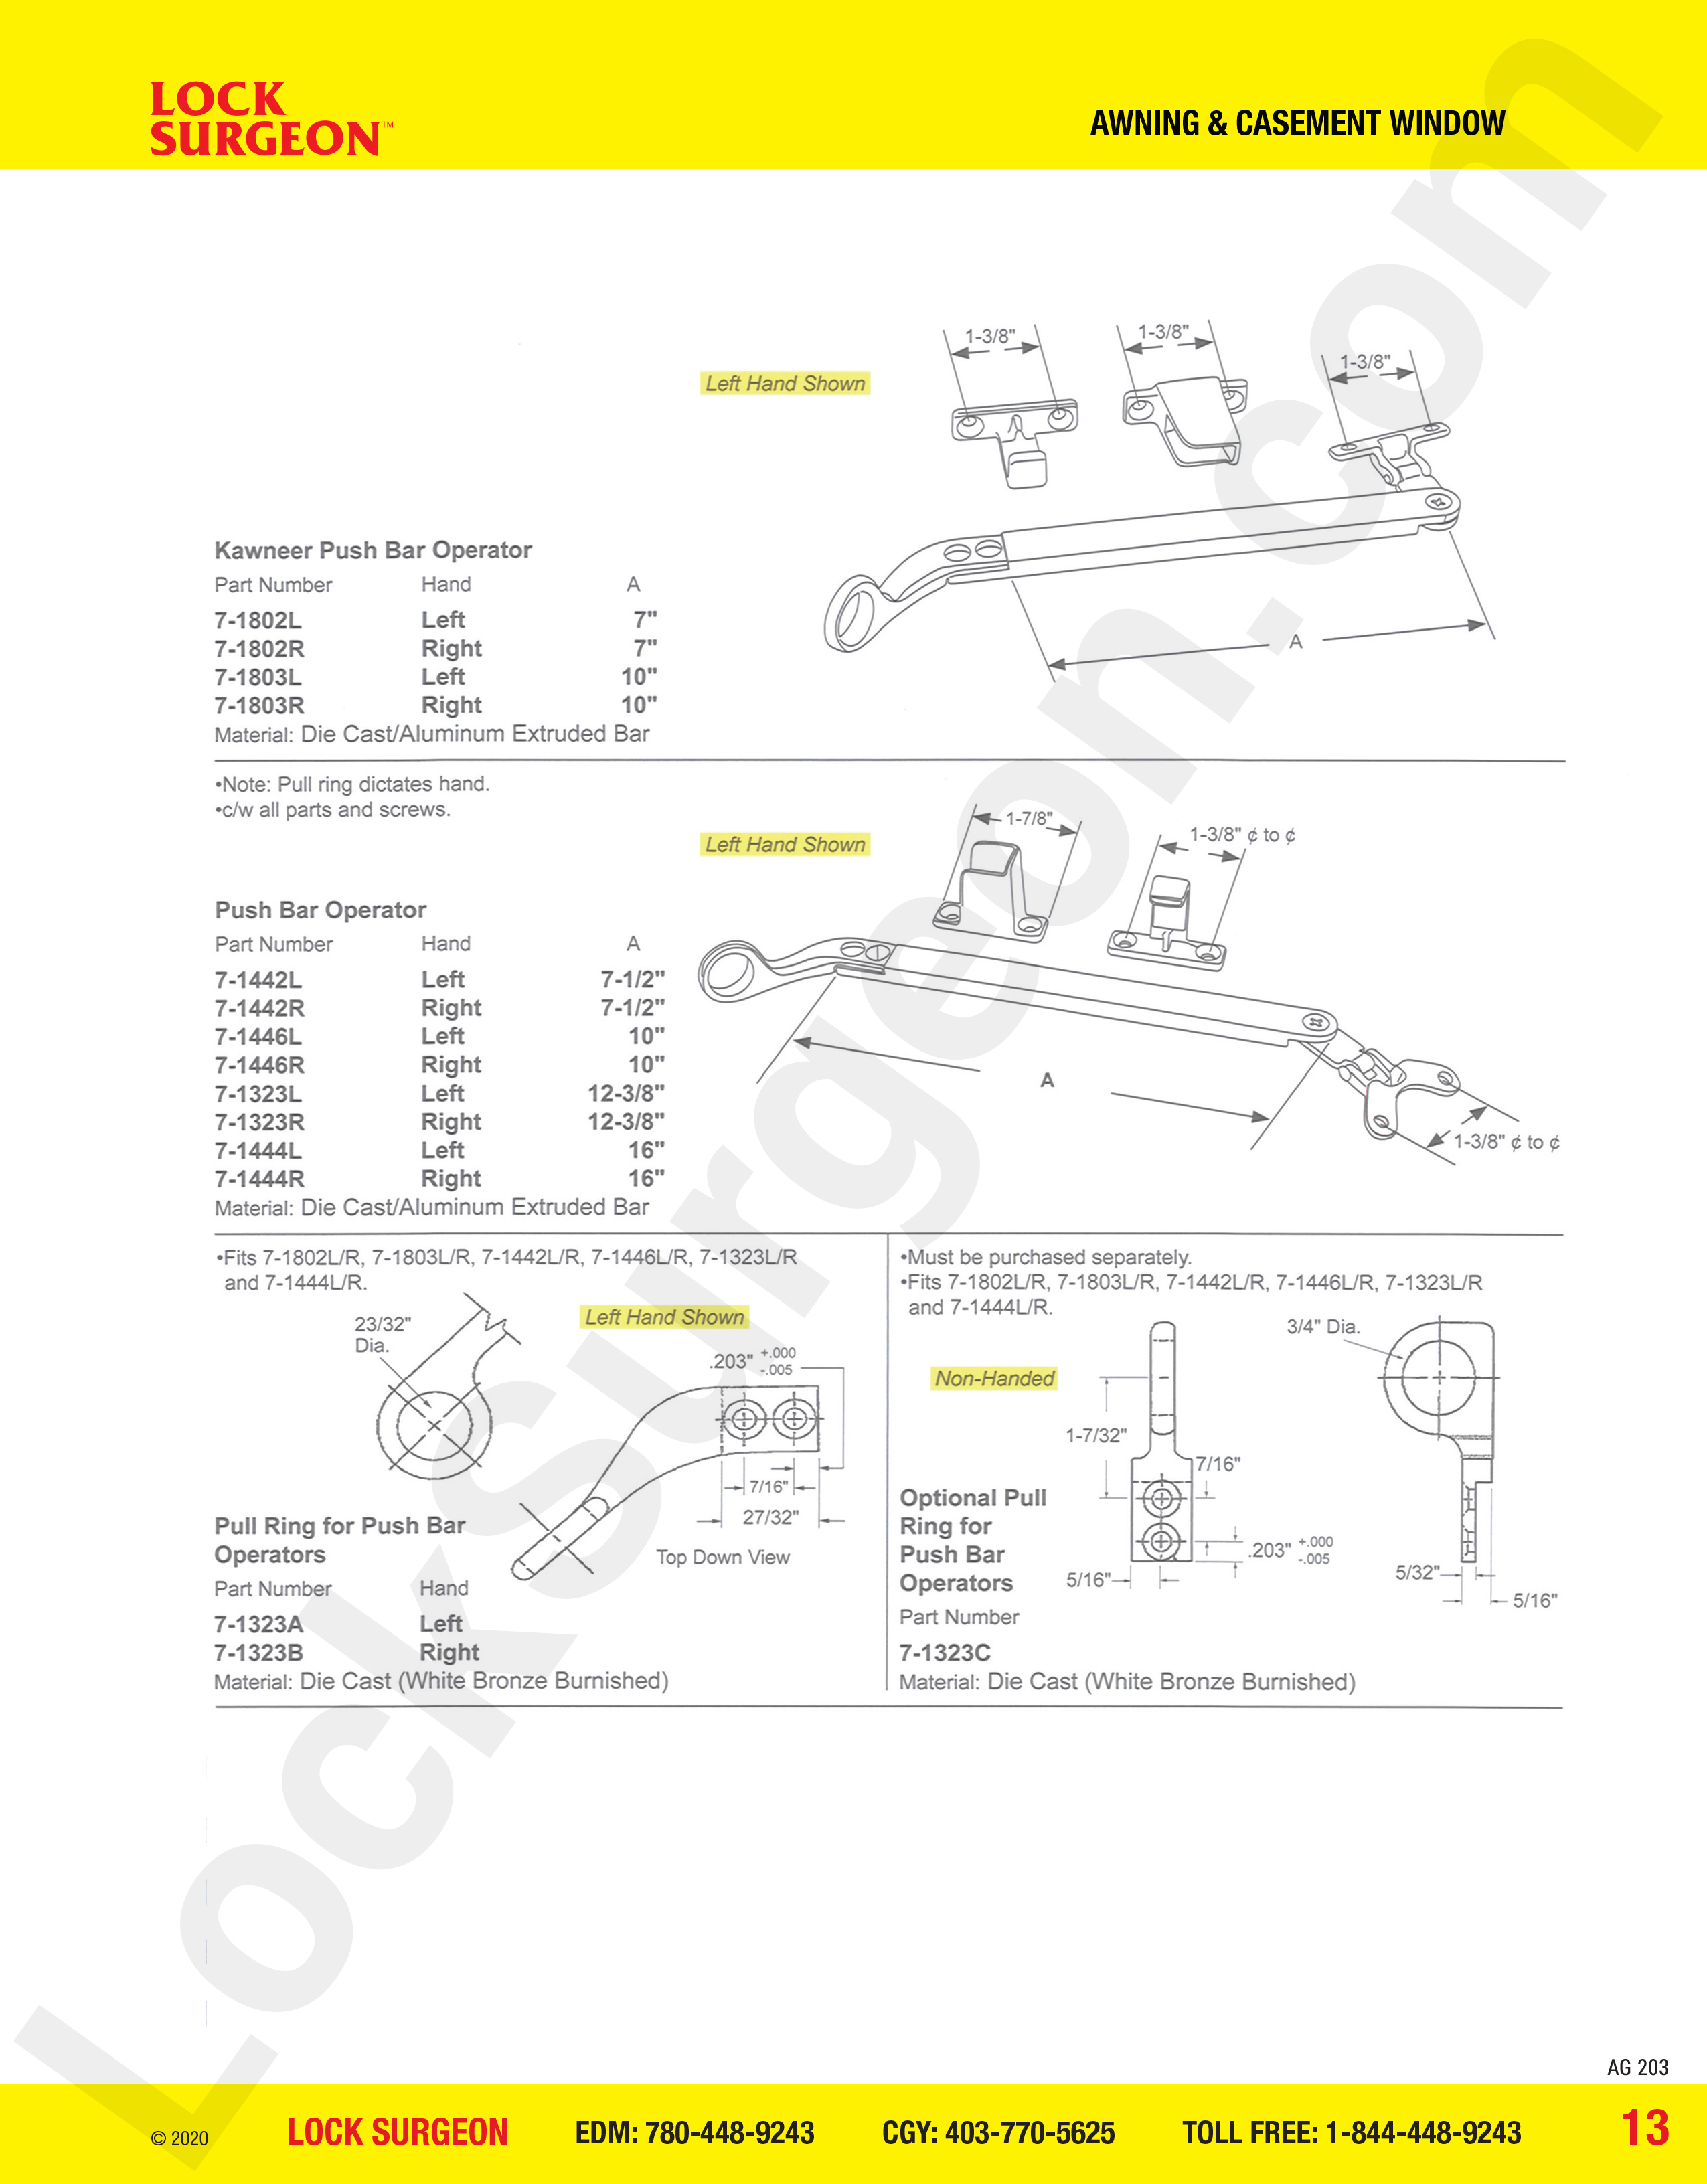 awning & casement window parts for kawneer push bar operators with optional pull rings for push bars